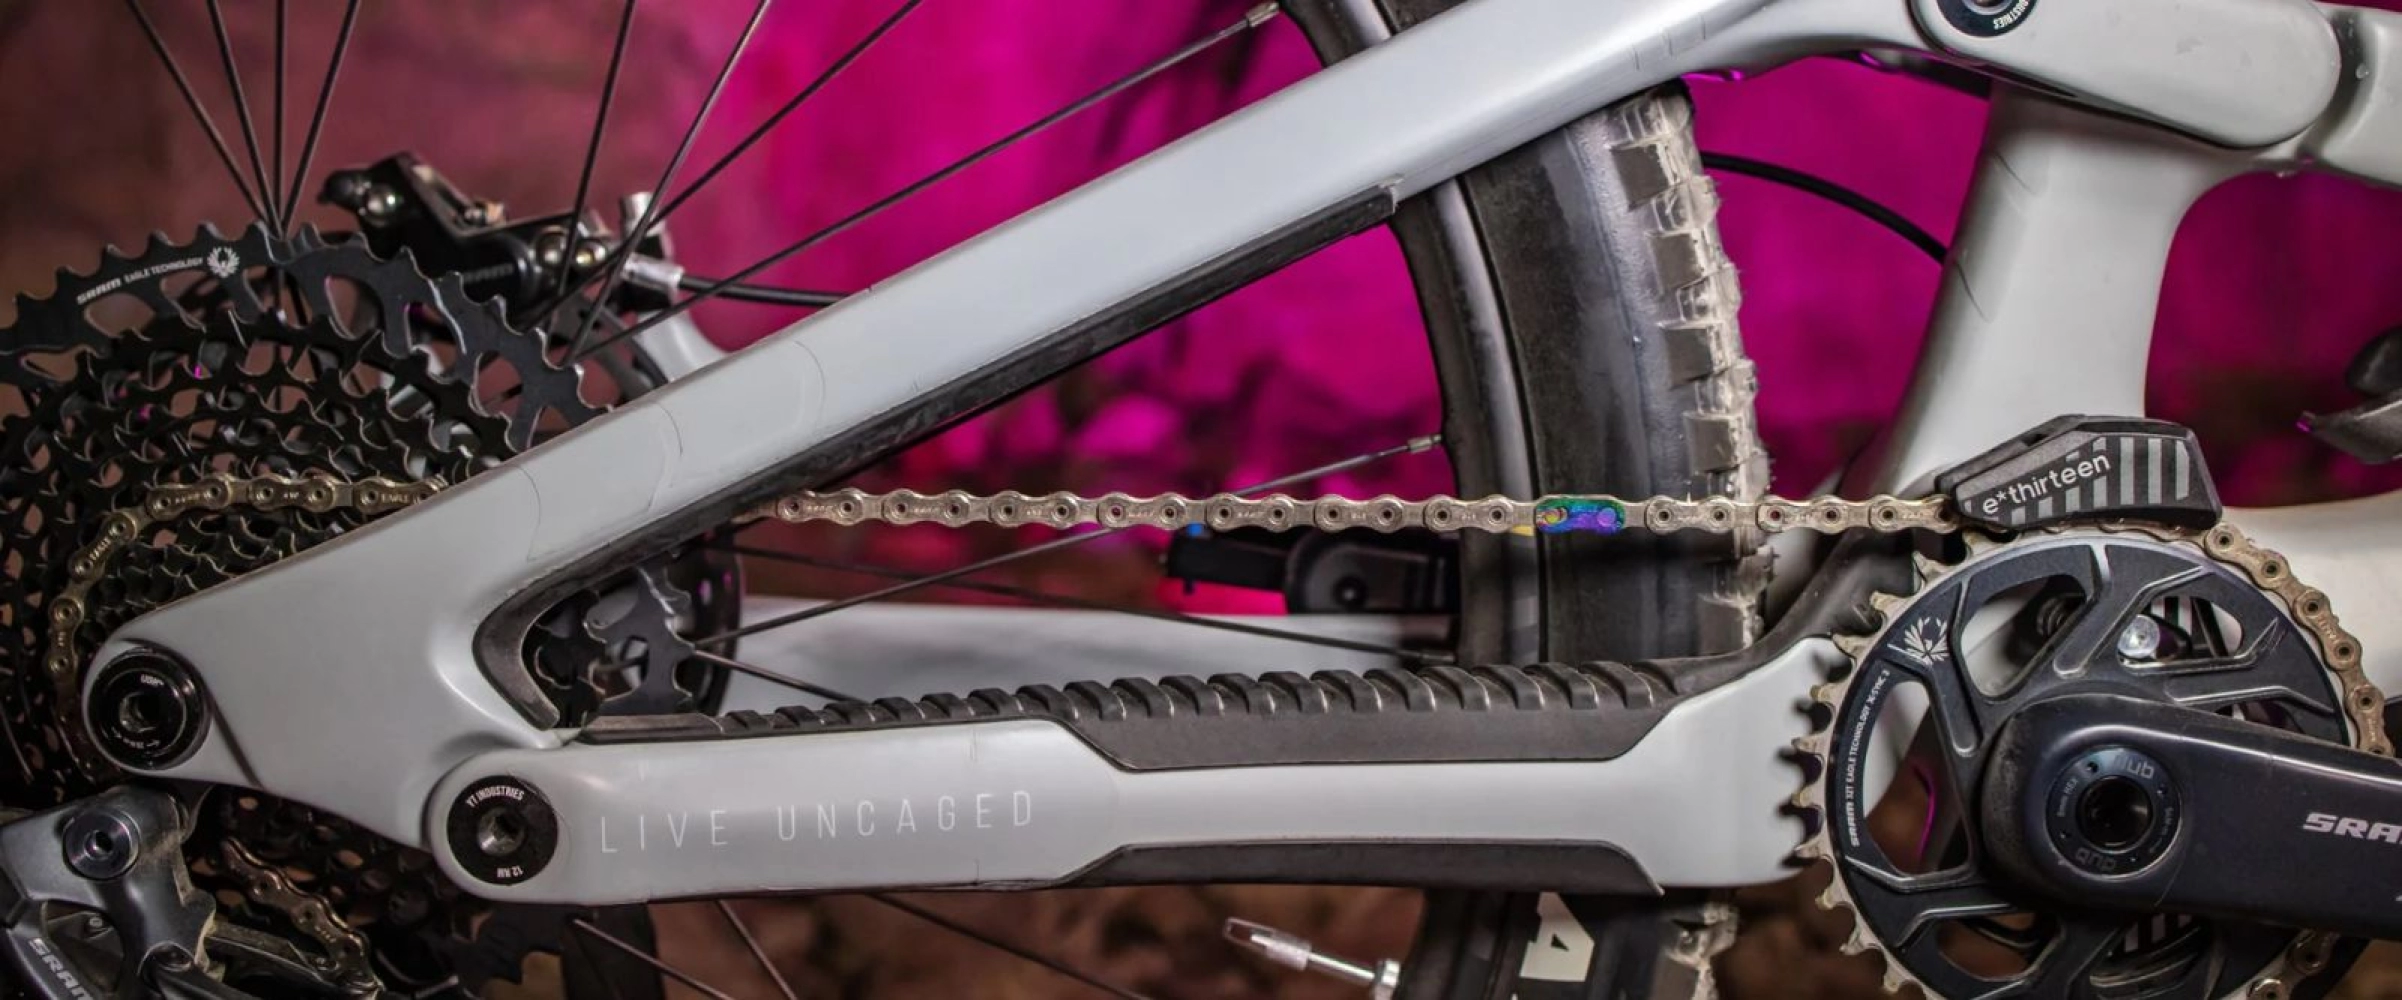 MUC-OFF Chainstay Protection Kit 